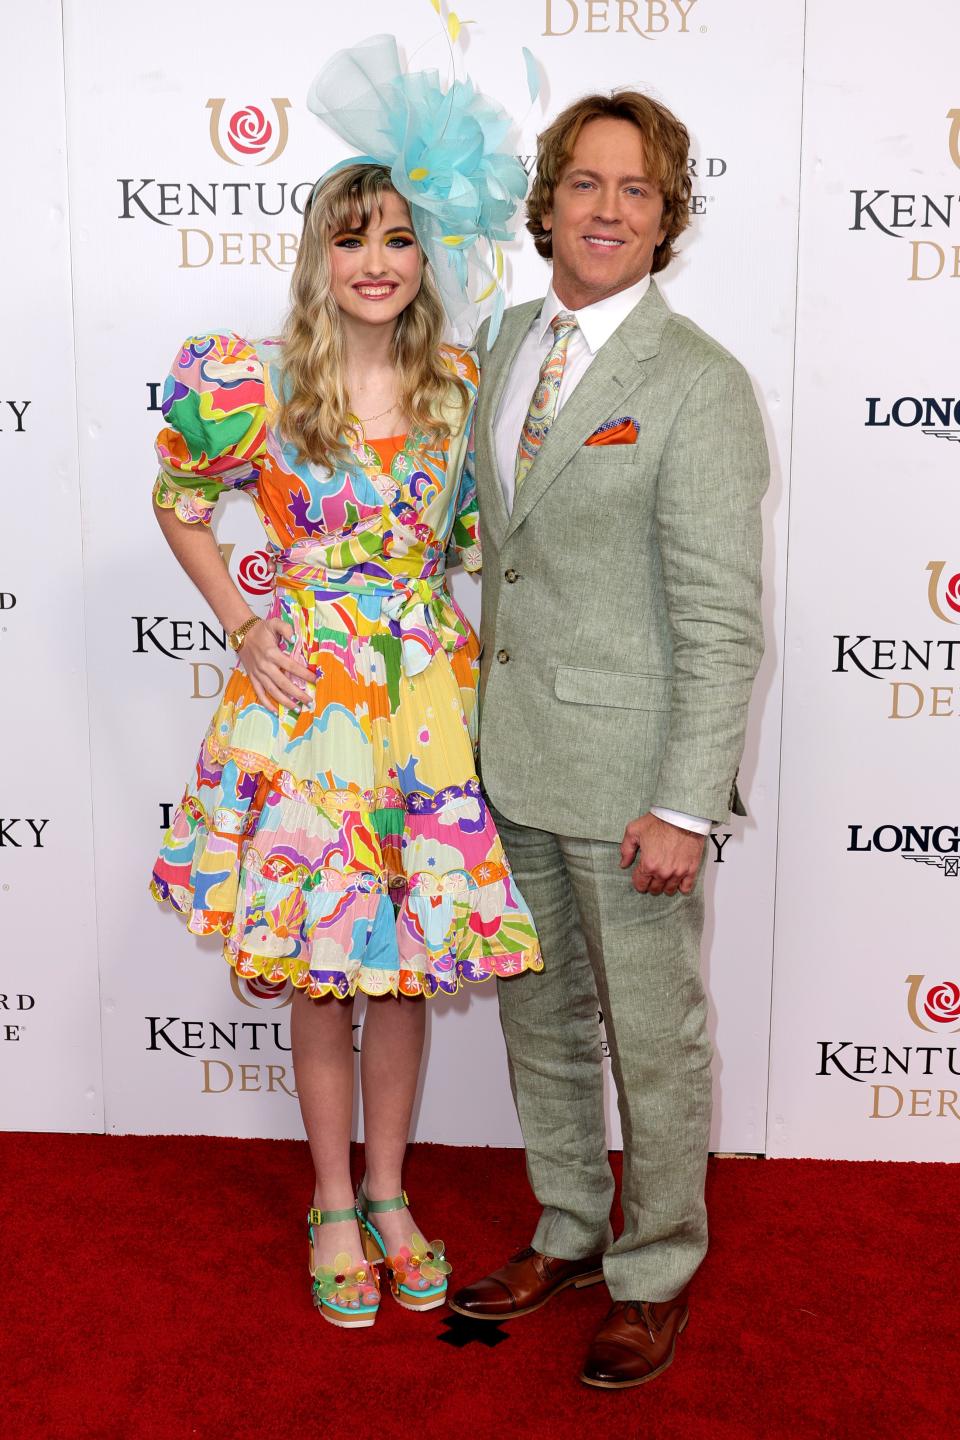 Dannielynn Birkhead and her dad, Larry, at the 148th Kentucky Derby at Churchill Downs on May 7.